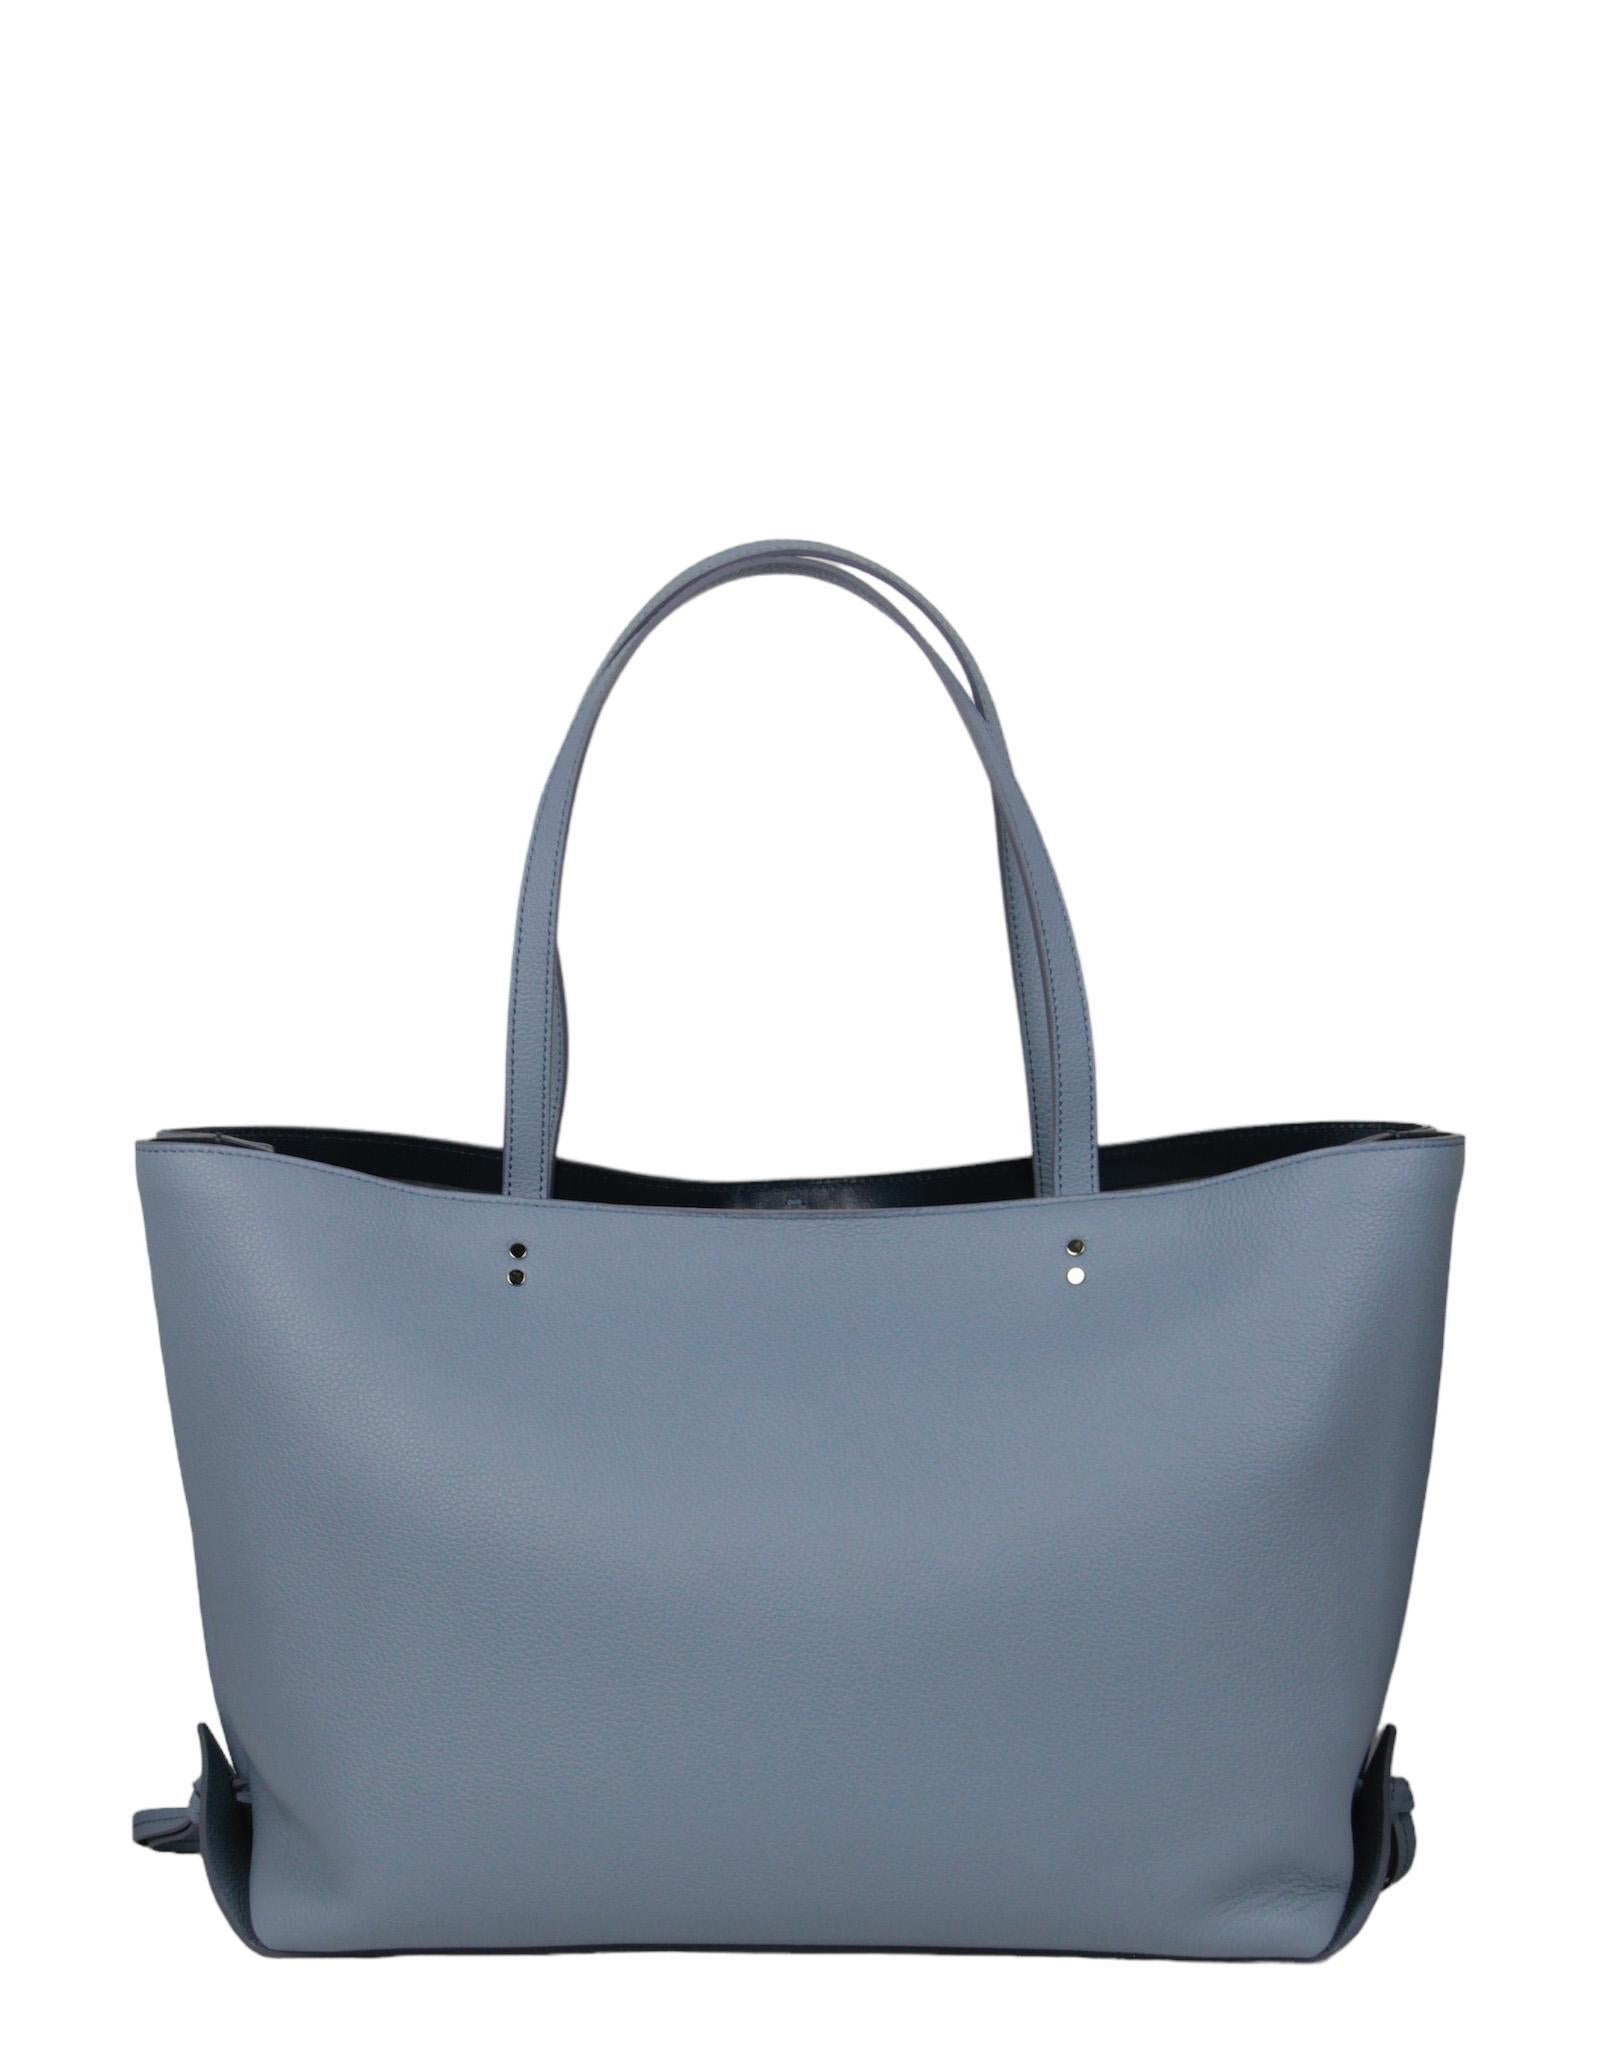 Chloe Shady Cobalt Blue Calfskin Leather Sense Tote Bag In Excellent Condition For Sale In New York, NY